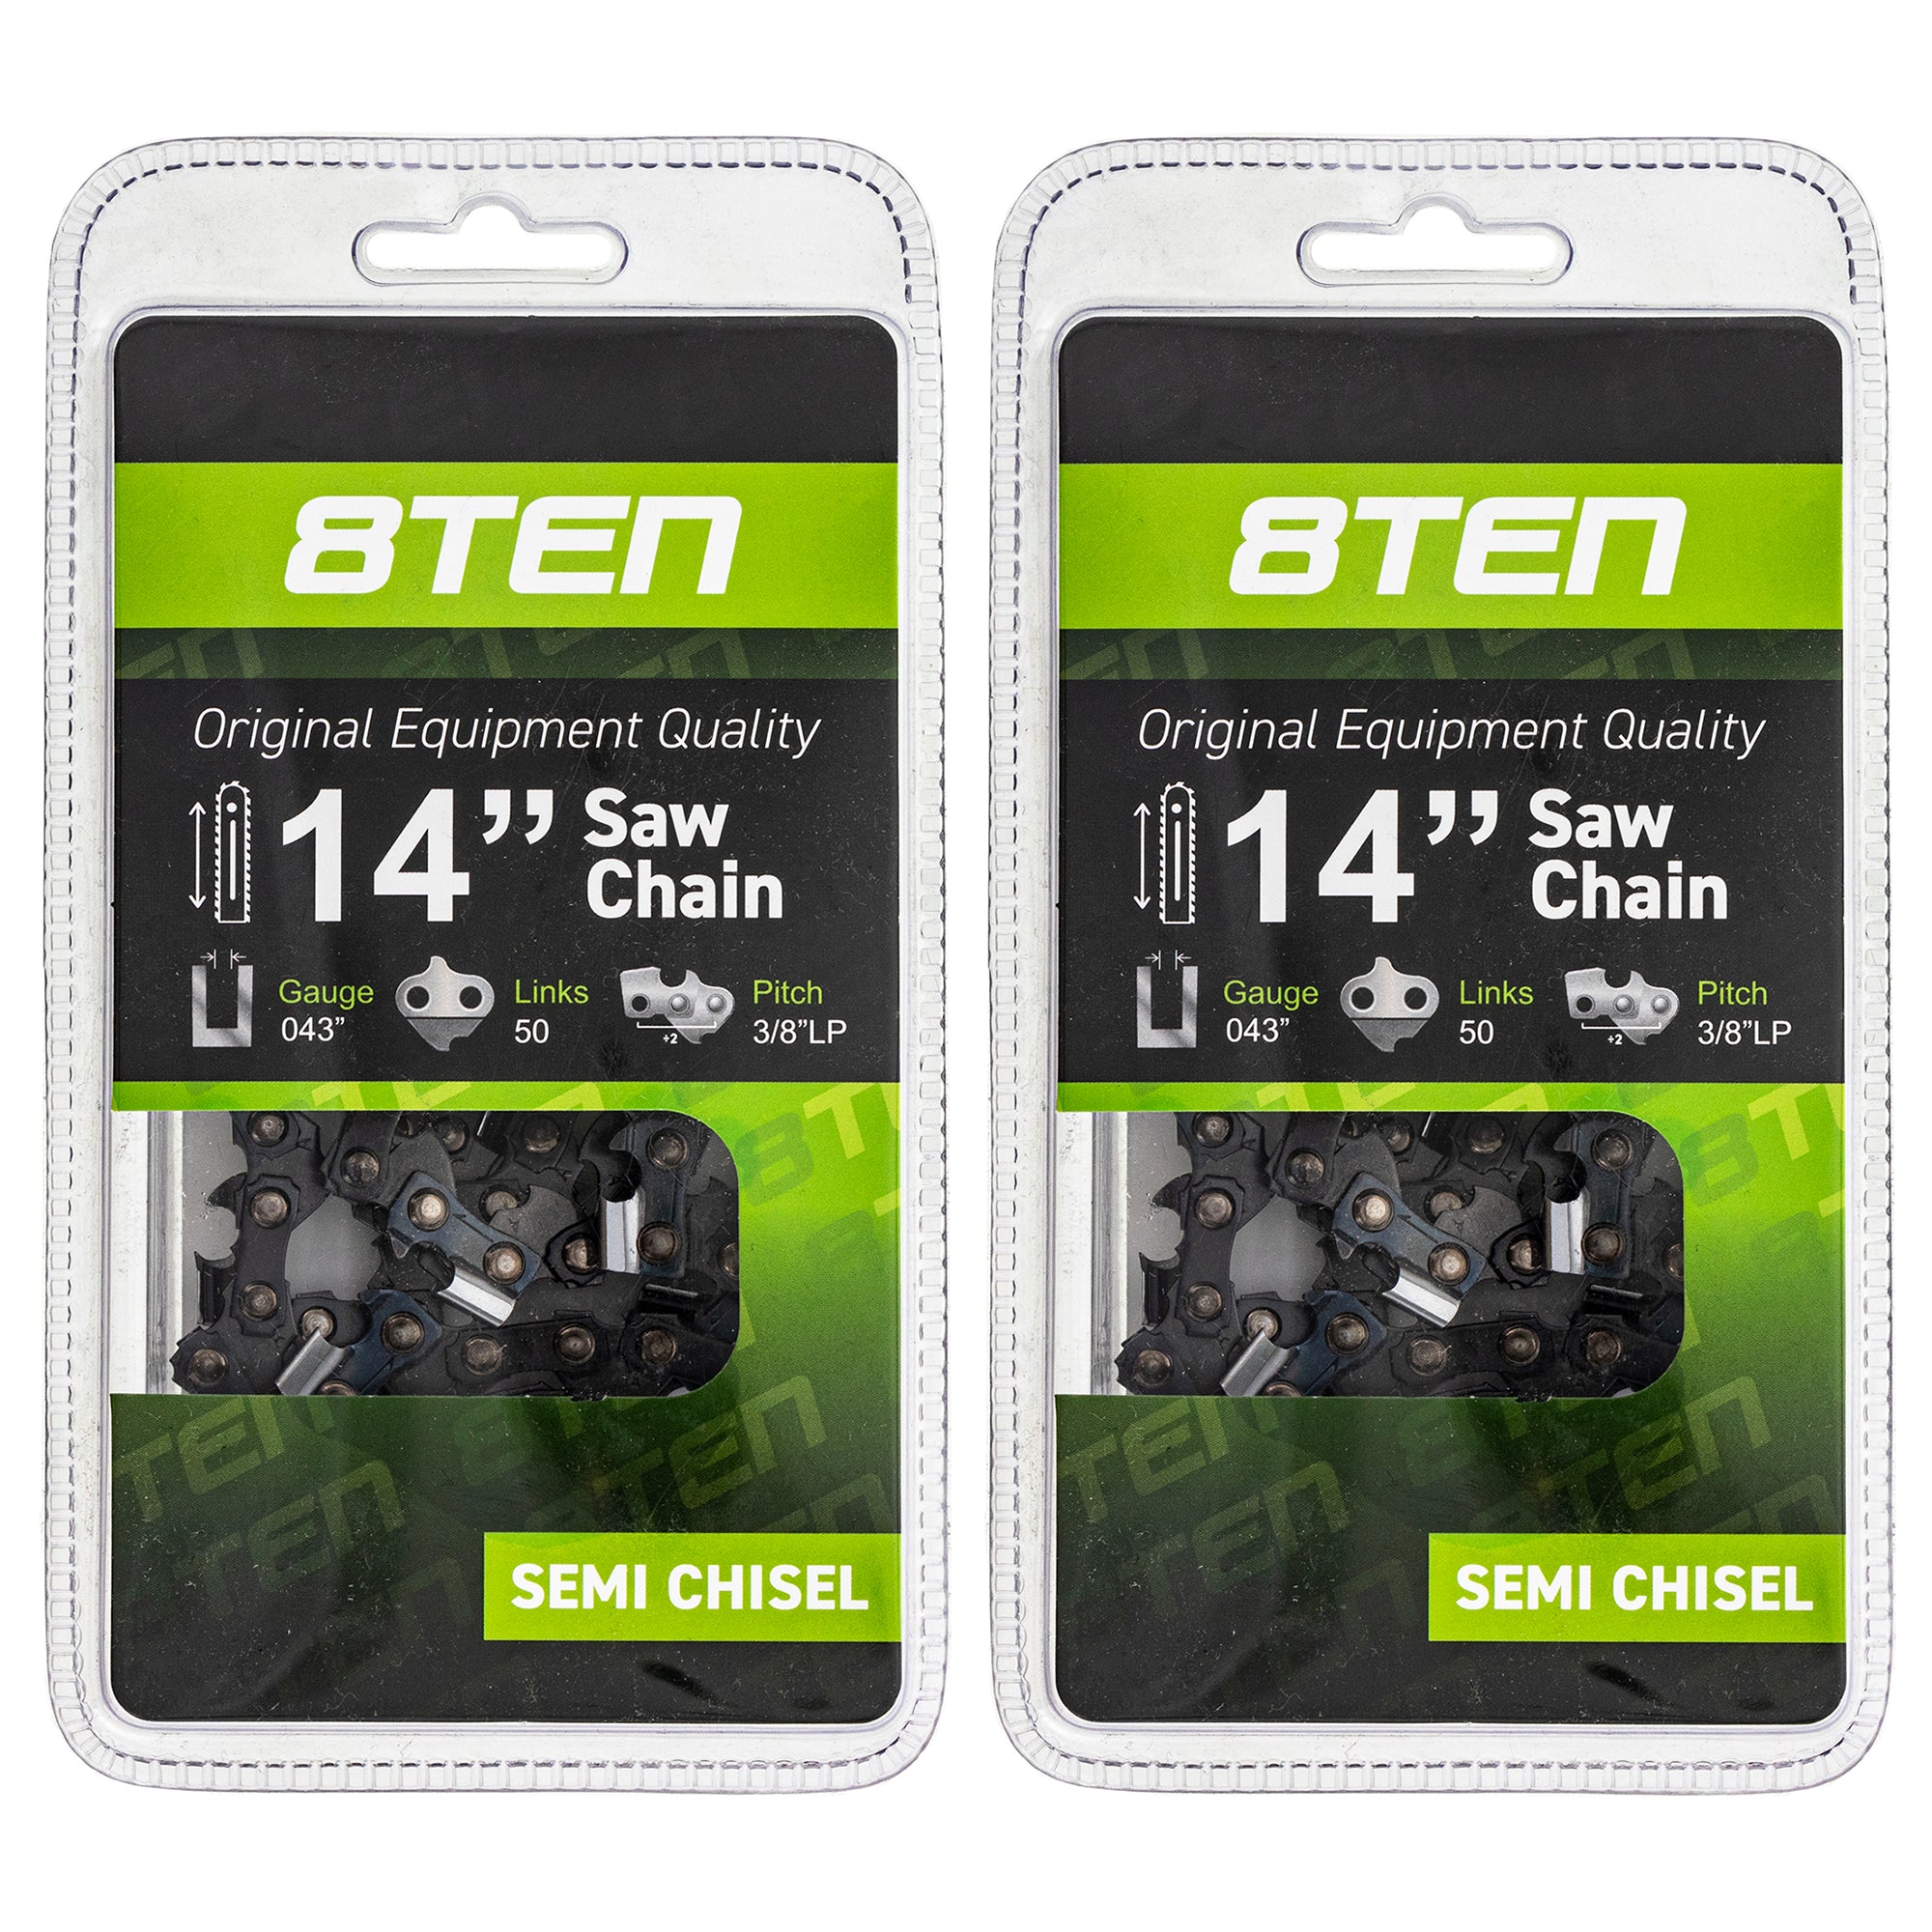 Chainsaw Chain 14 Inch .043 3/8 LP 50DL 2-Pack for zOTHER Stens Oregon Carlton MSE MSA MS 8TEN 810-CCC2237H